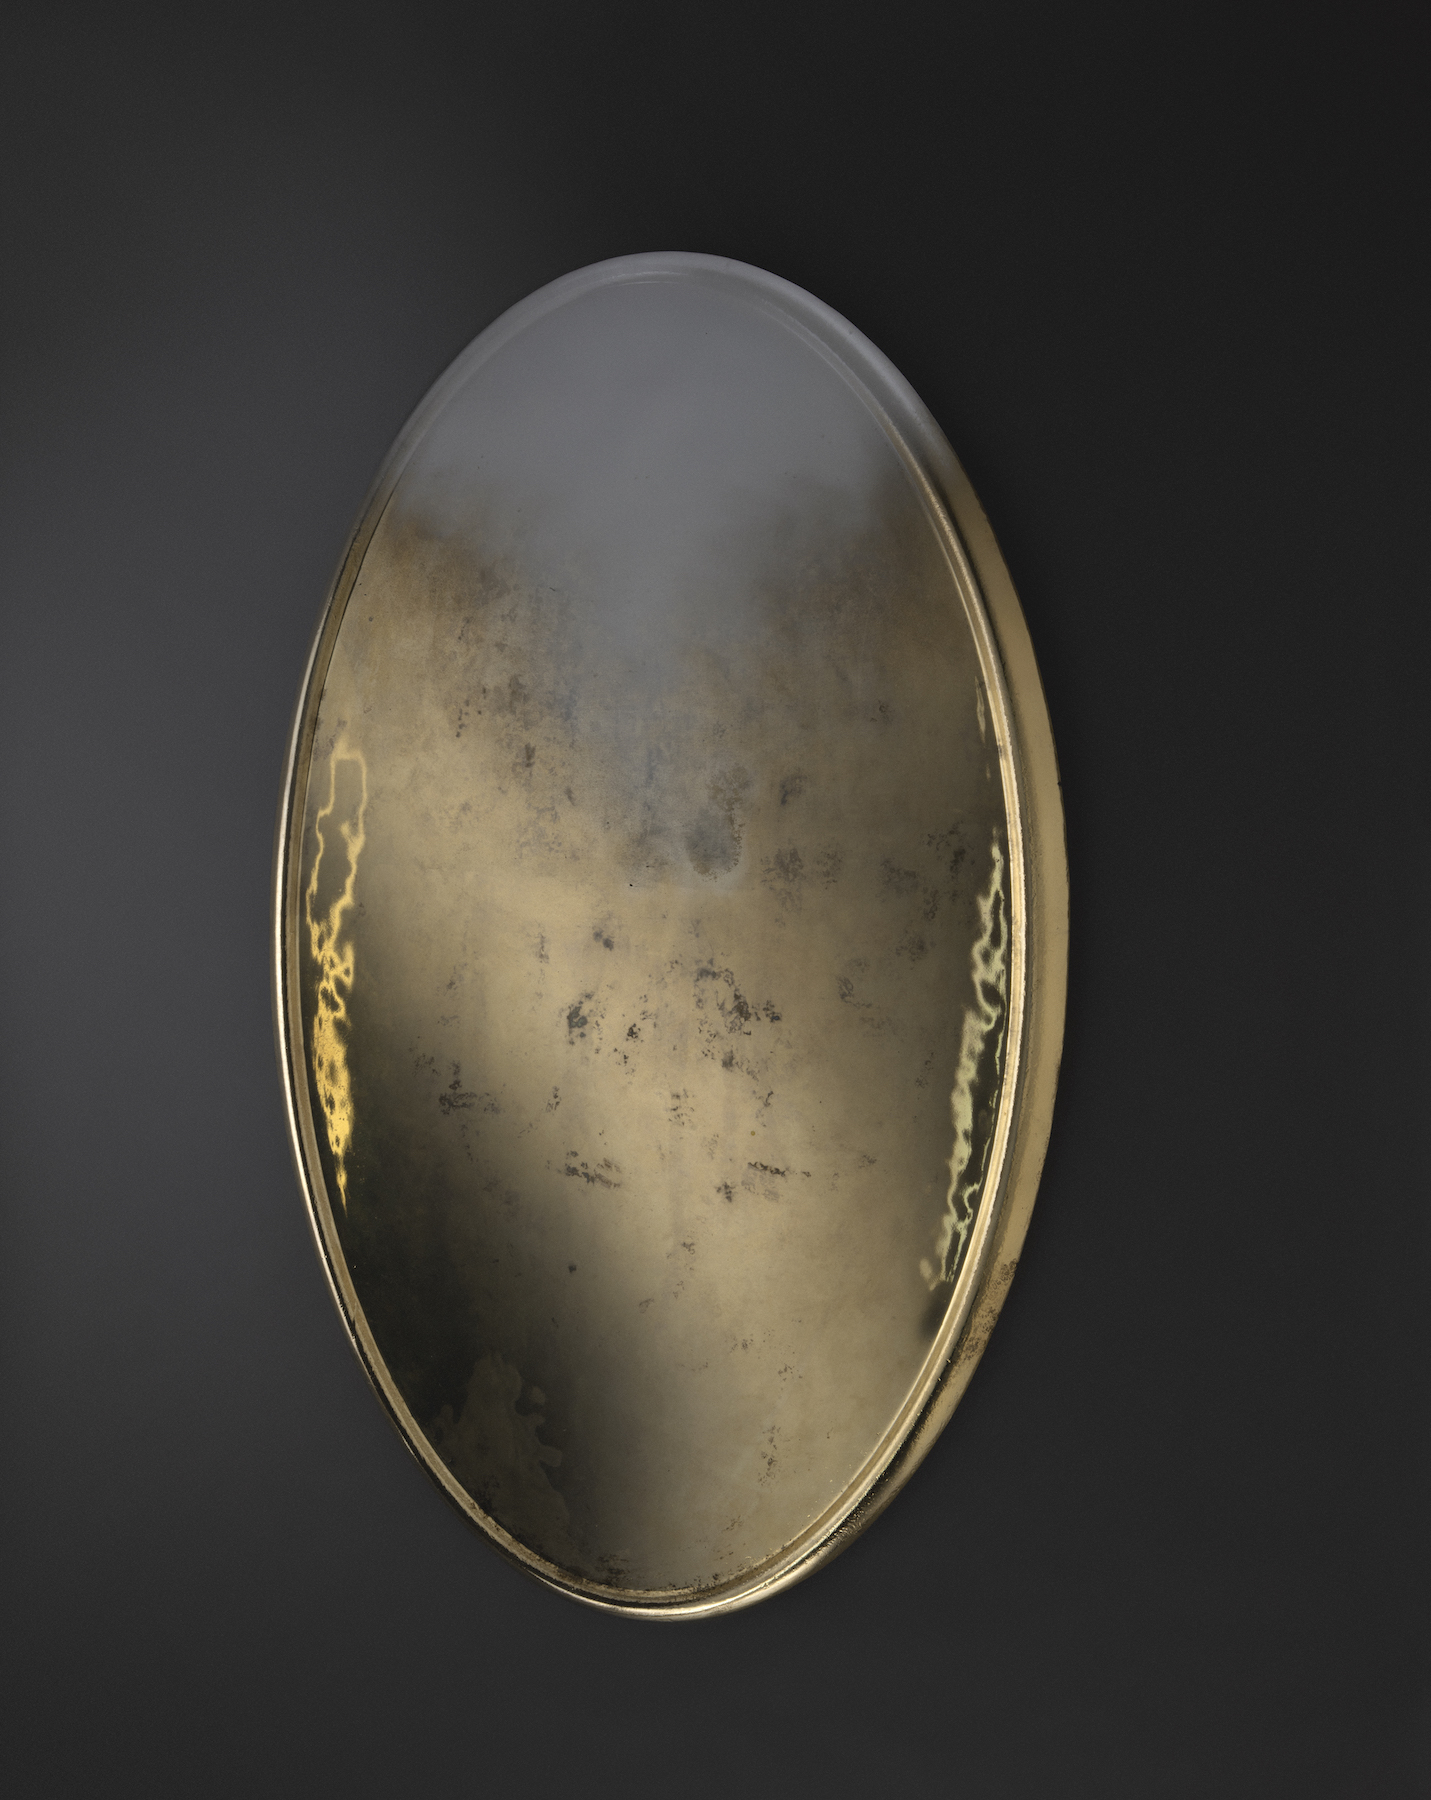 Mia Jung Cloud Mirror, from the Charles Burnand Gallery – summer interior design trends in Effect Magazine